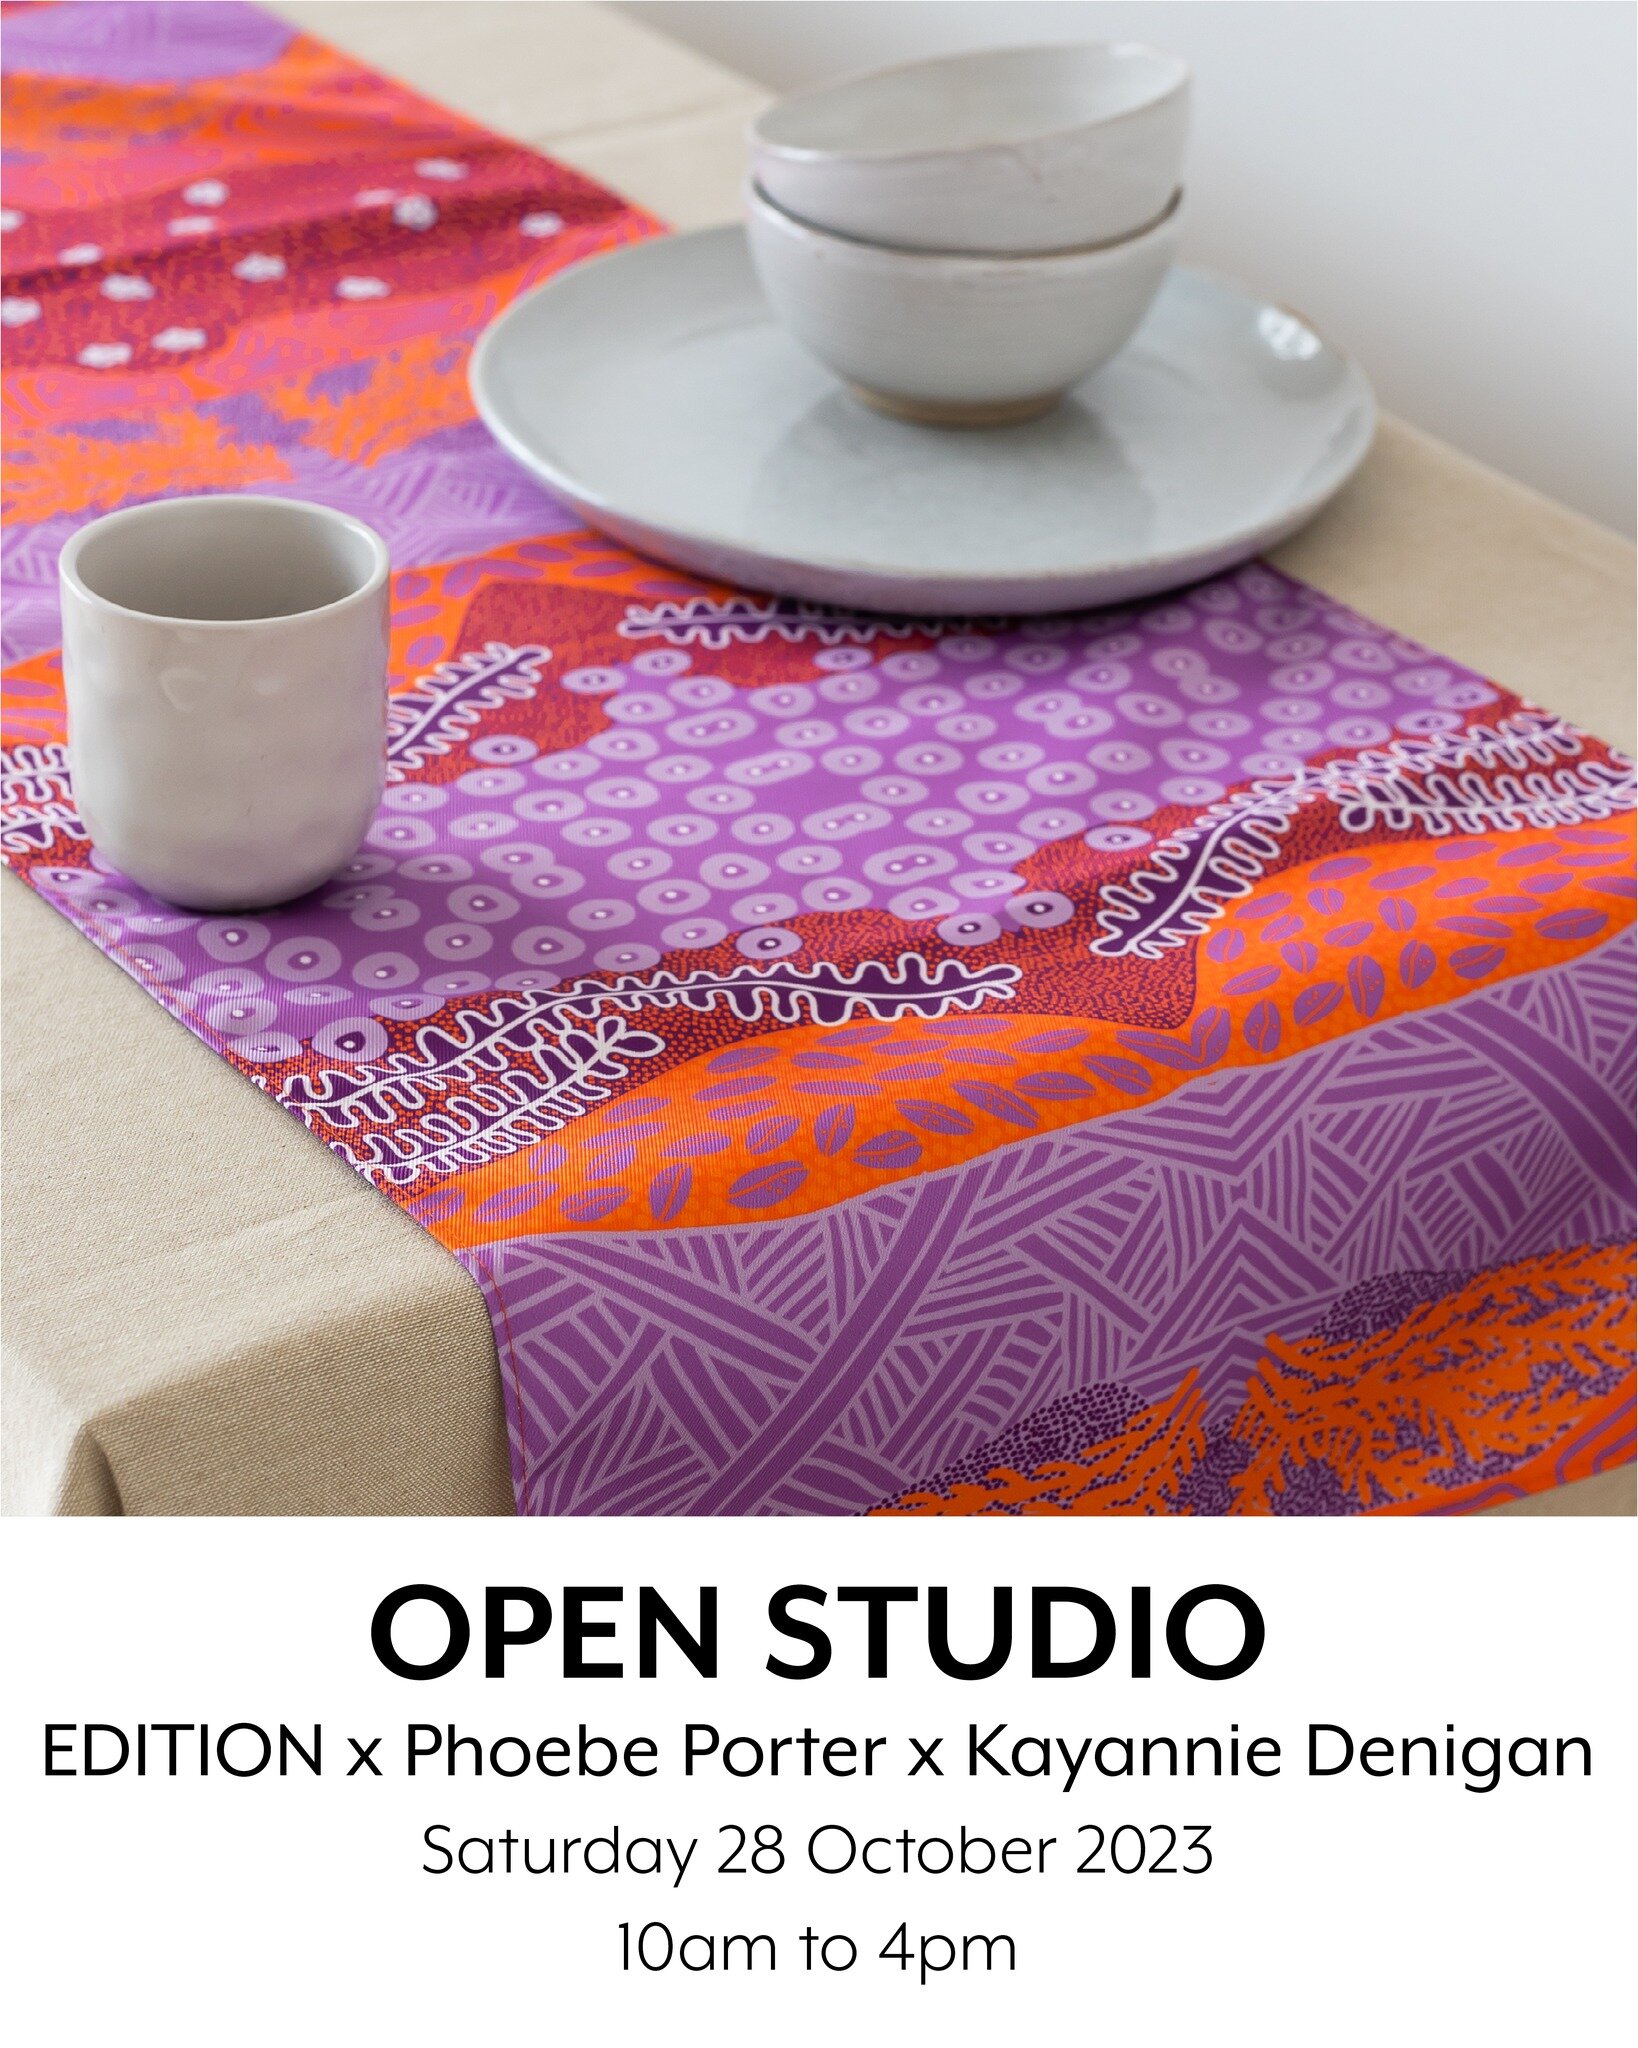 OPEN STUDIO &amp; POP UP

I'm so excited to be joining the talented Alice van Meurs of @edition.label + fabulous jeweller @phoebe.porter for the @craft_design_canberra 2023 Open Studios program. 

I'll have a range of textiles, prints, and even some 